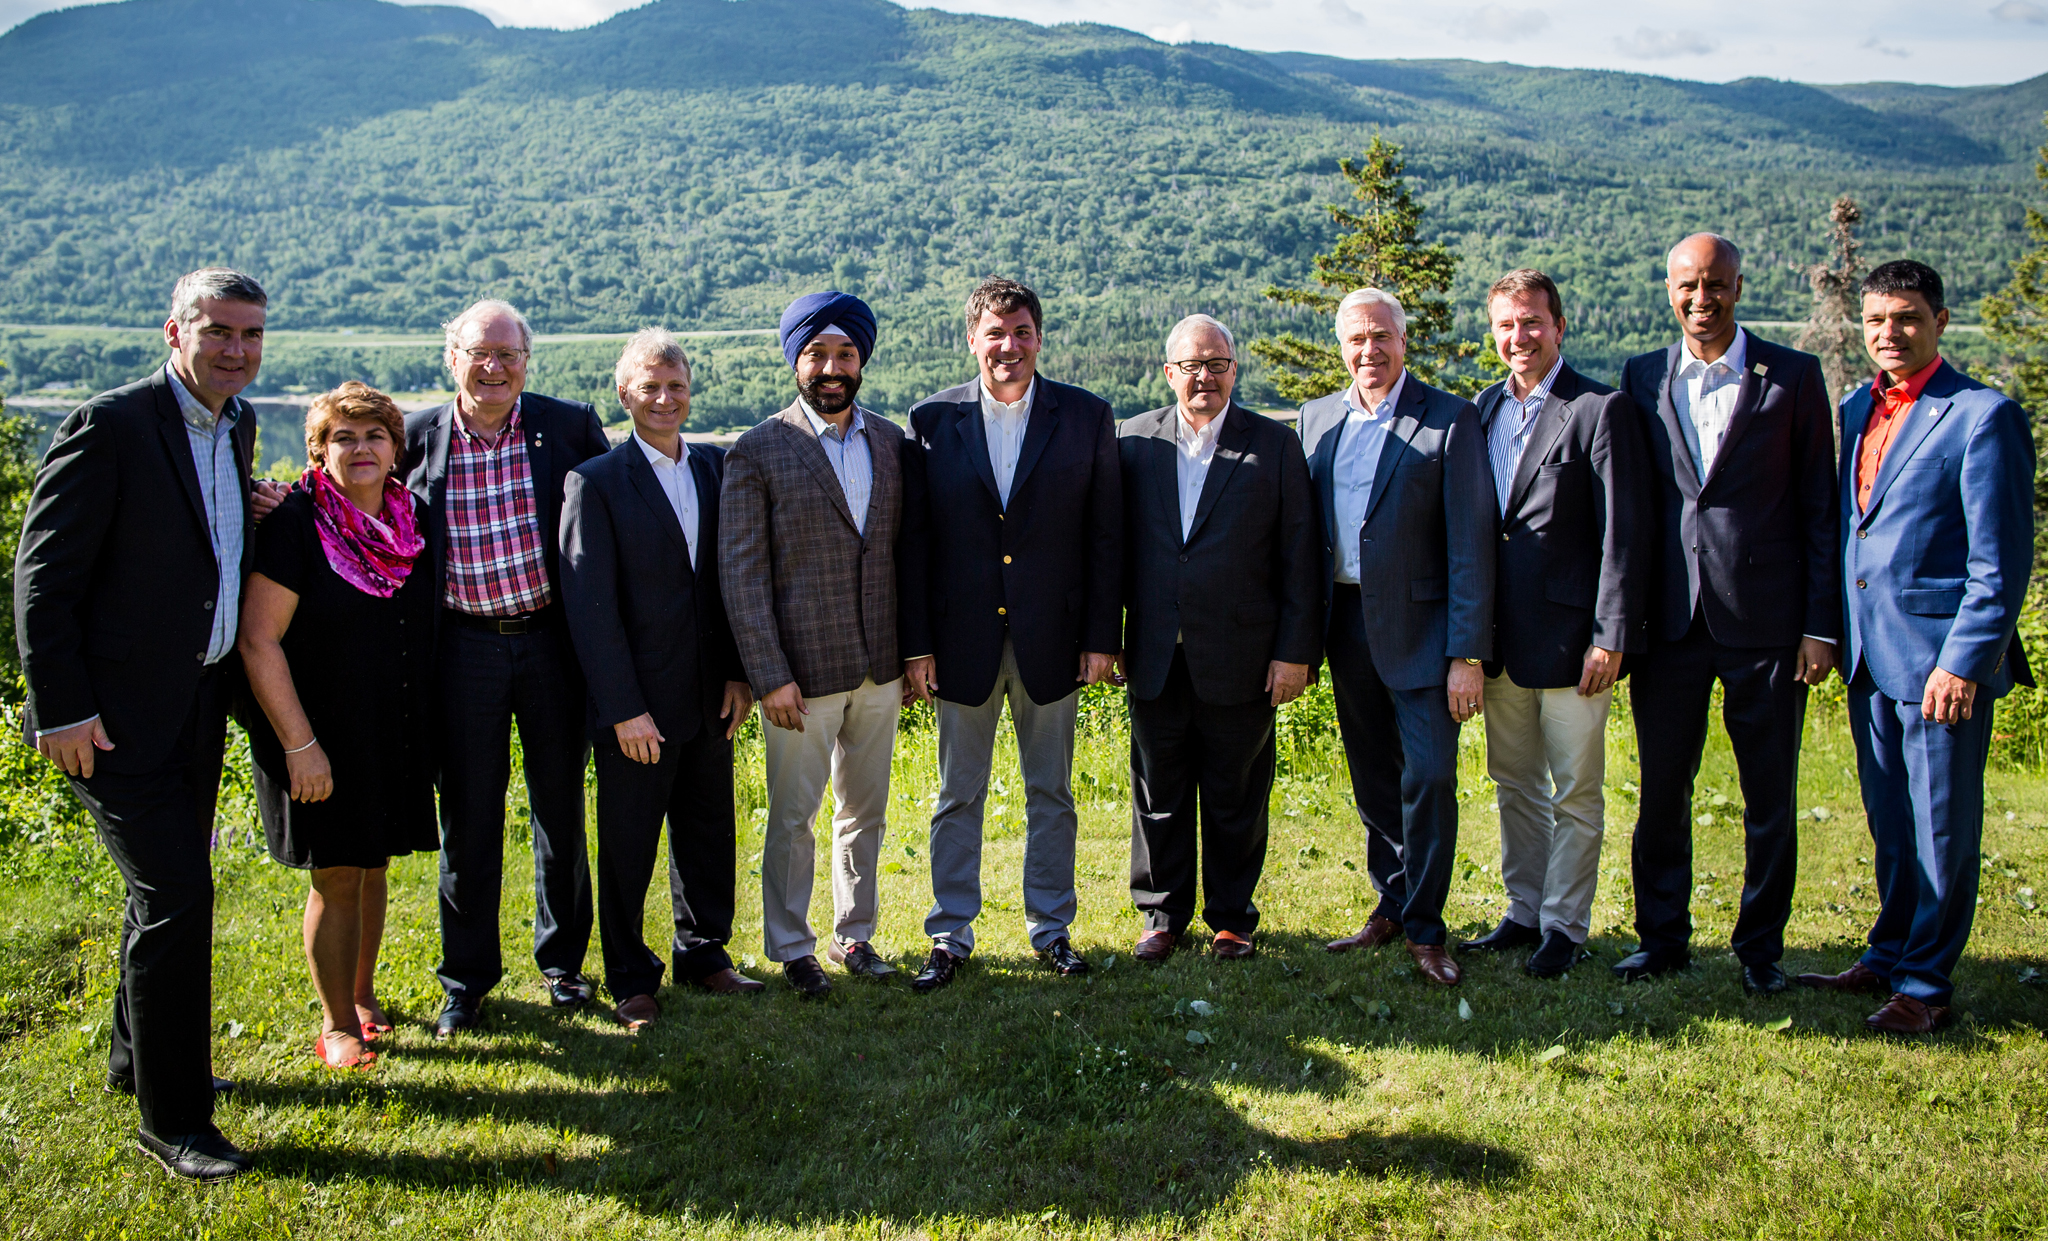 July 11, 2017 - At July 11, 2017, Atlantic Growth Strategy meeting in Humber Valley, NL, federal ministers and Atlantic premiers discussed next steps and announced a $24.5 million joint investment aimed at positioning Atlantic Canada as a top destination in the global tourism sector, creating more jobs and giving a boost to small businesses. In this photo, they are joined by Parliamentary Secretary for Small Business and Tourism Gudie Hutchings, New Brunswick President of the Treasury Board and Minister responsible for Trade Policy Roger Melanson, and Parliamentary Secretary to the Minister of Immigration, Refugees and Citizenship Serge Cormier.